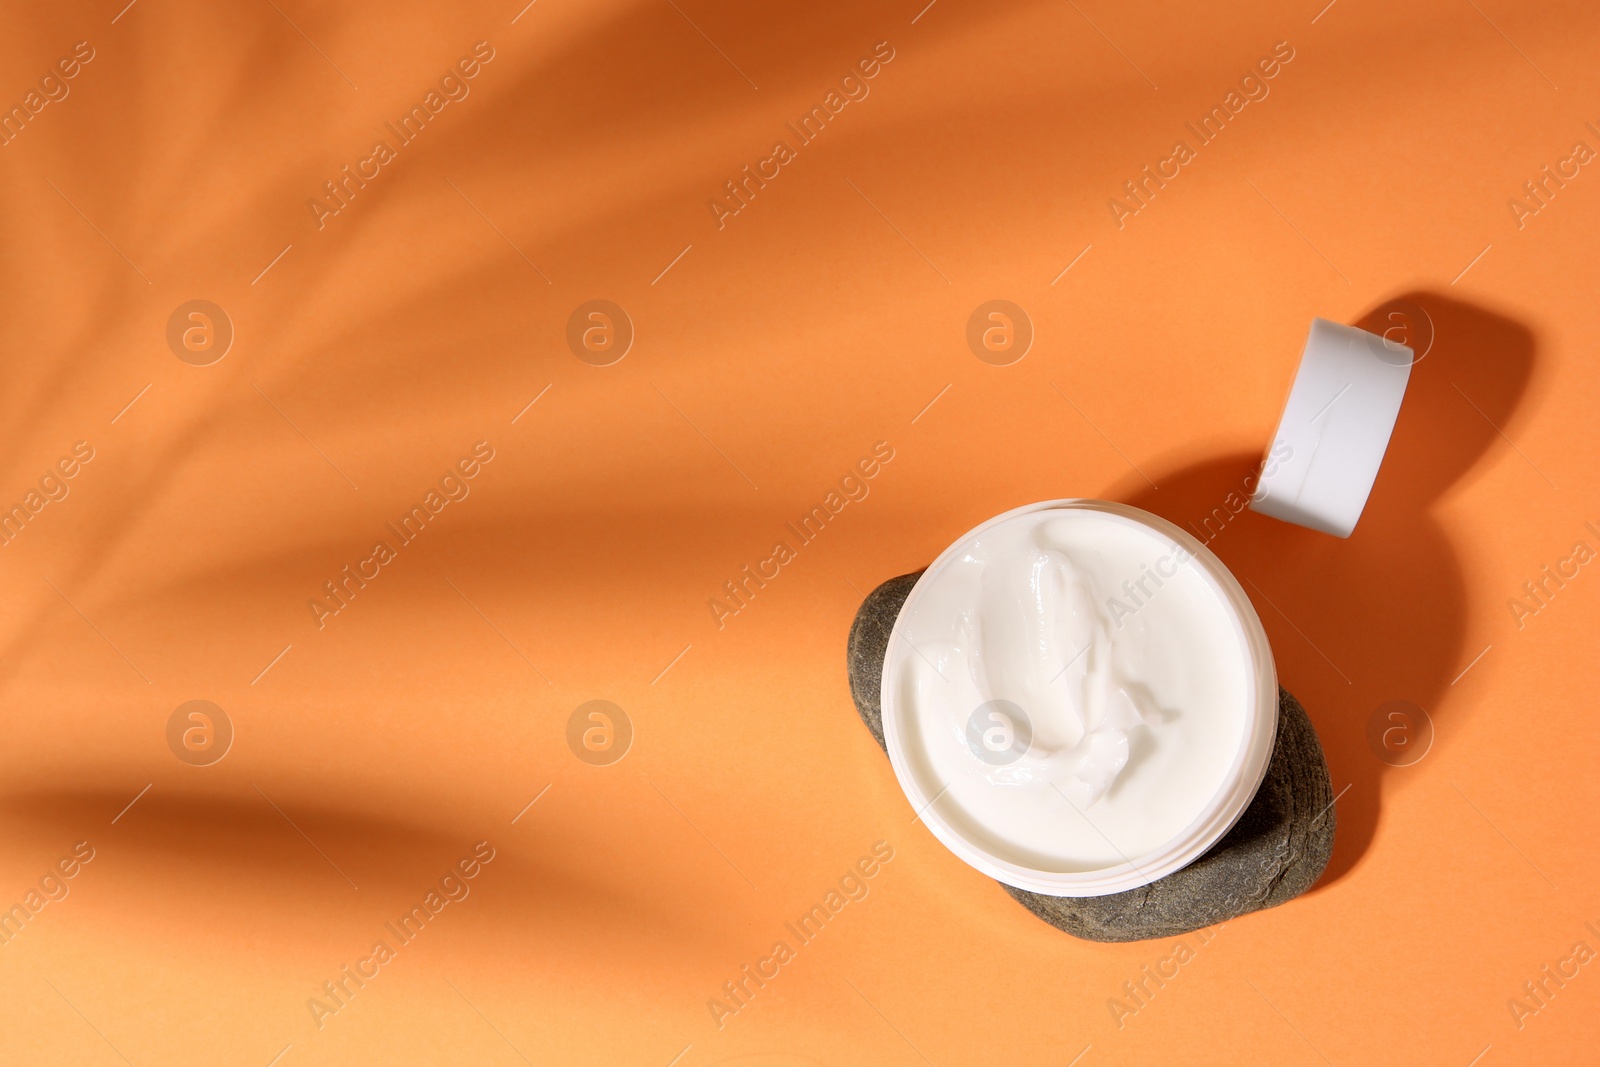 Photo of Cosmetic products and spa stone on orange background, flat lay. Space for text